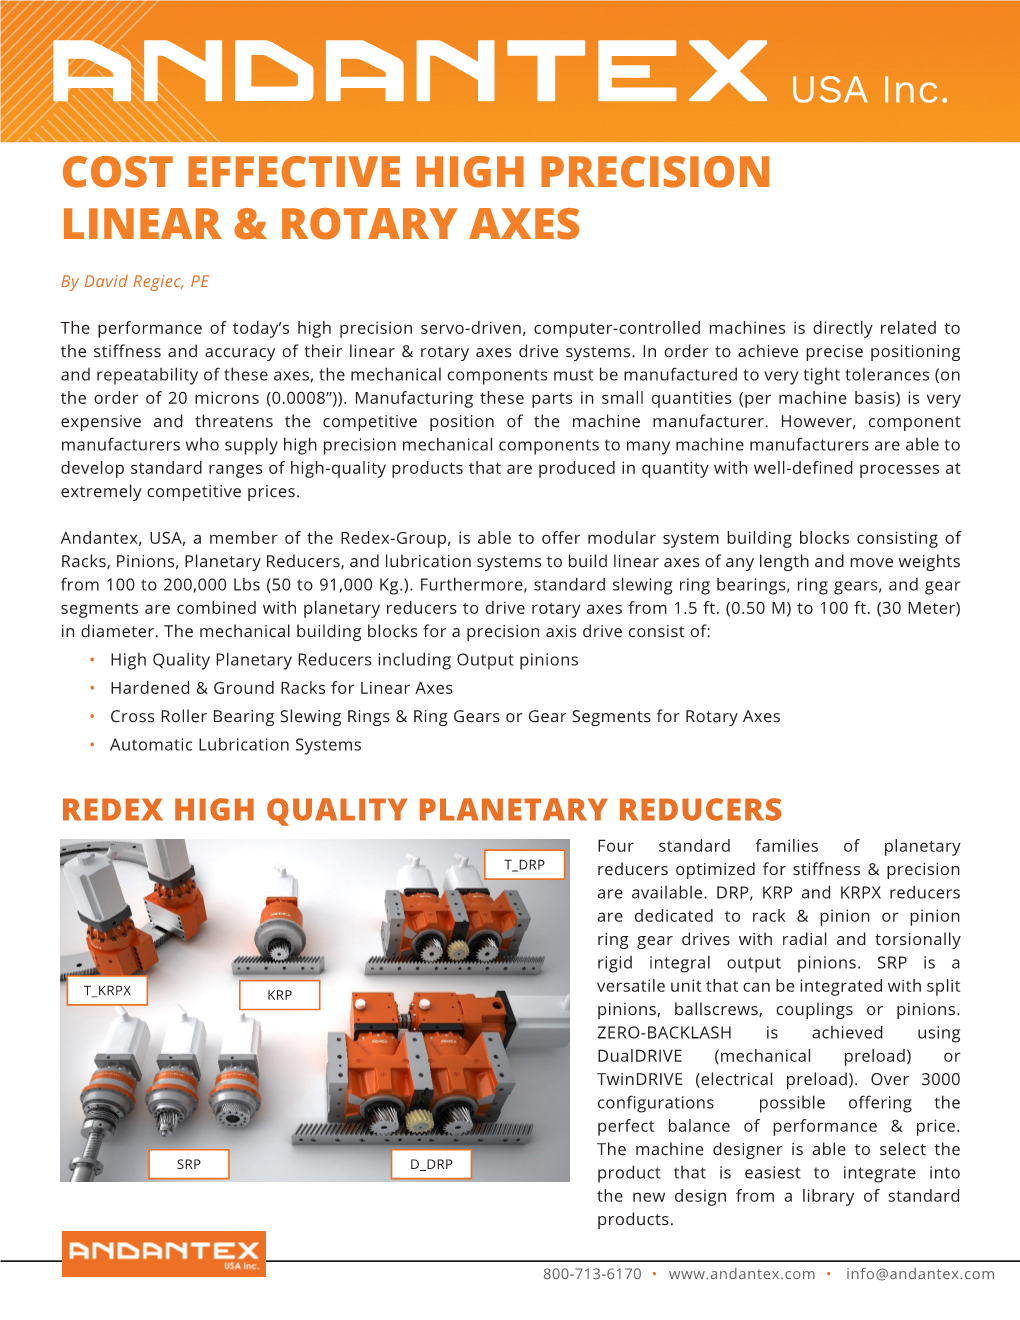 Cost Effective High Precision Linear & Rotary Axes